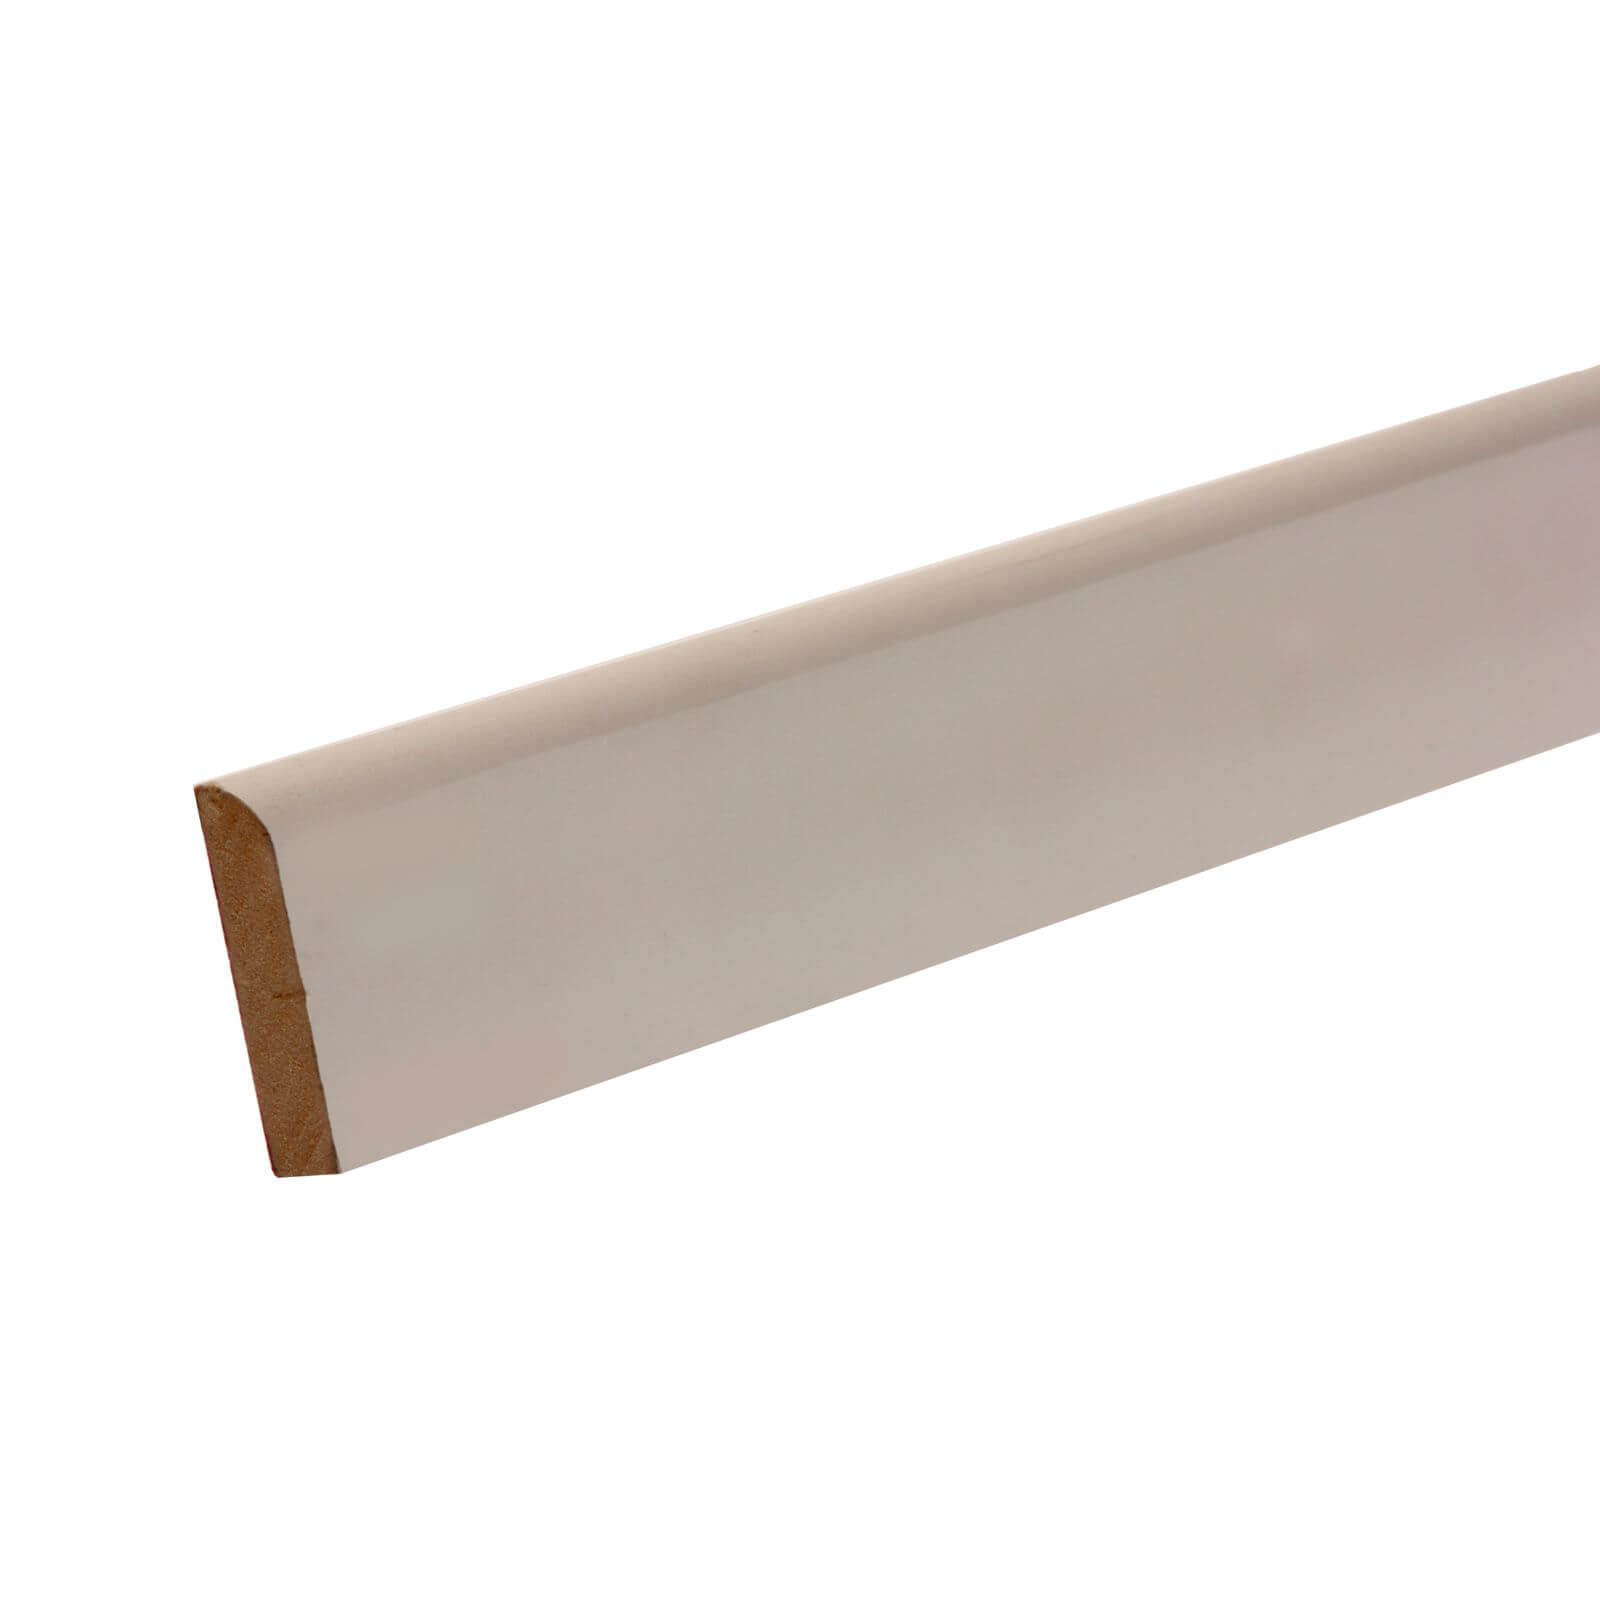 Metsa Wood MDF Primed Large Round Architrave 2.1m (14.5 x 69mm x 2100mm)